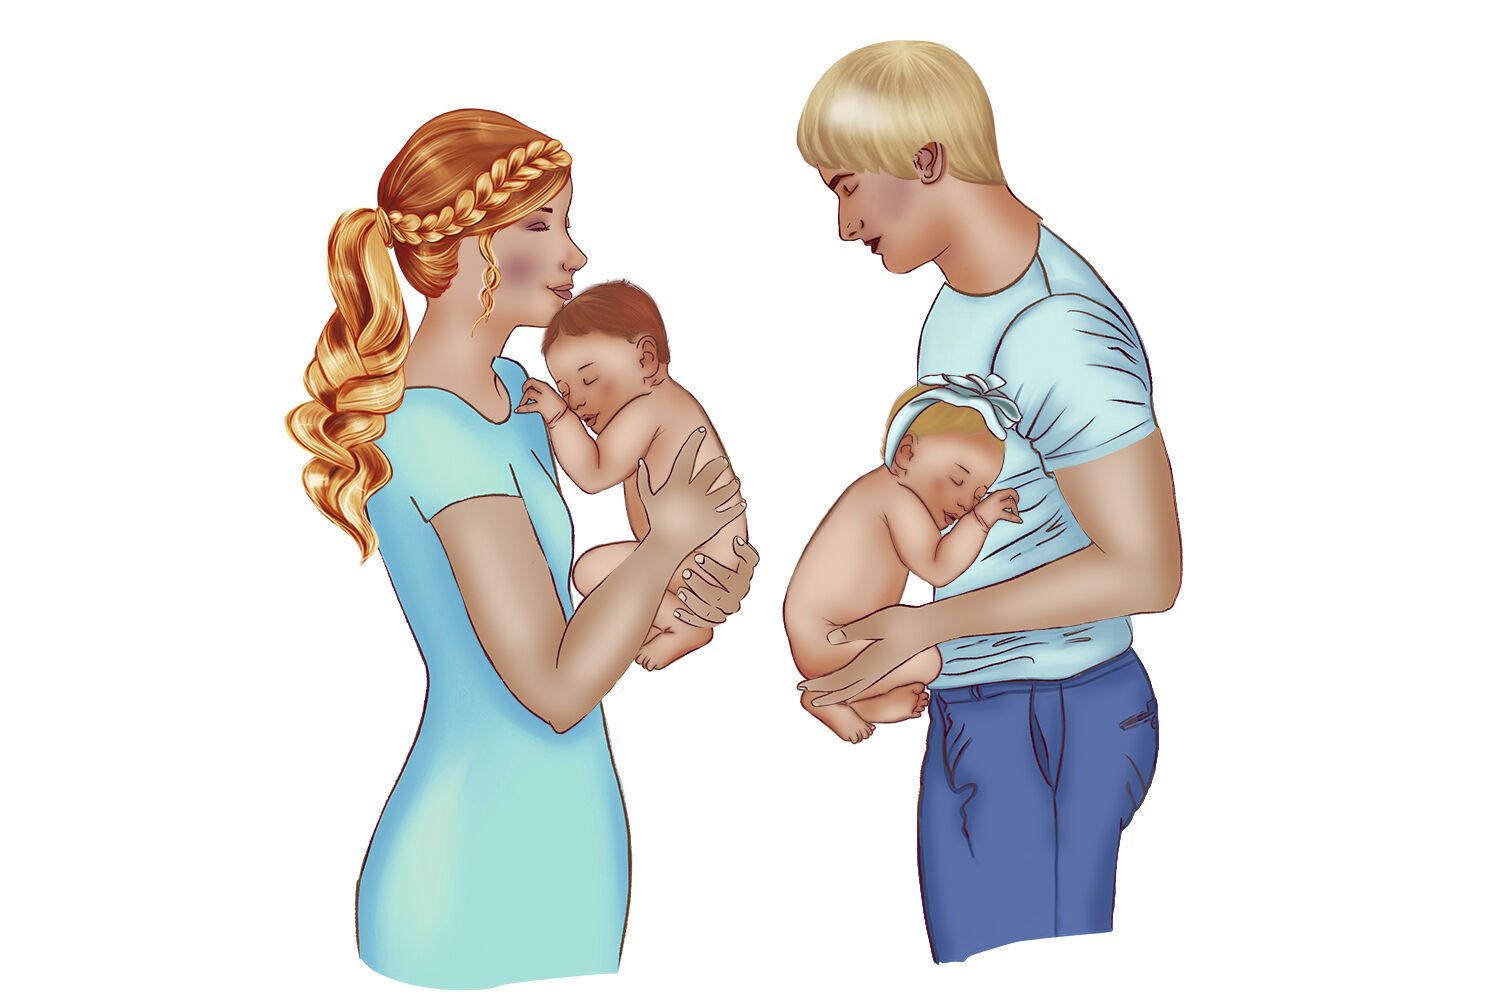 lds clipart mother